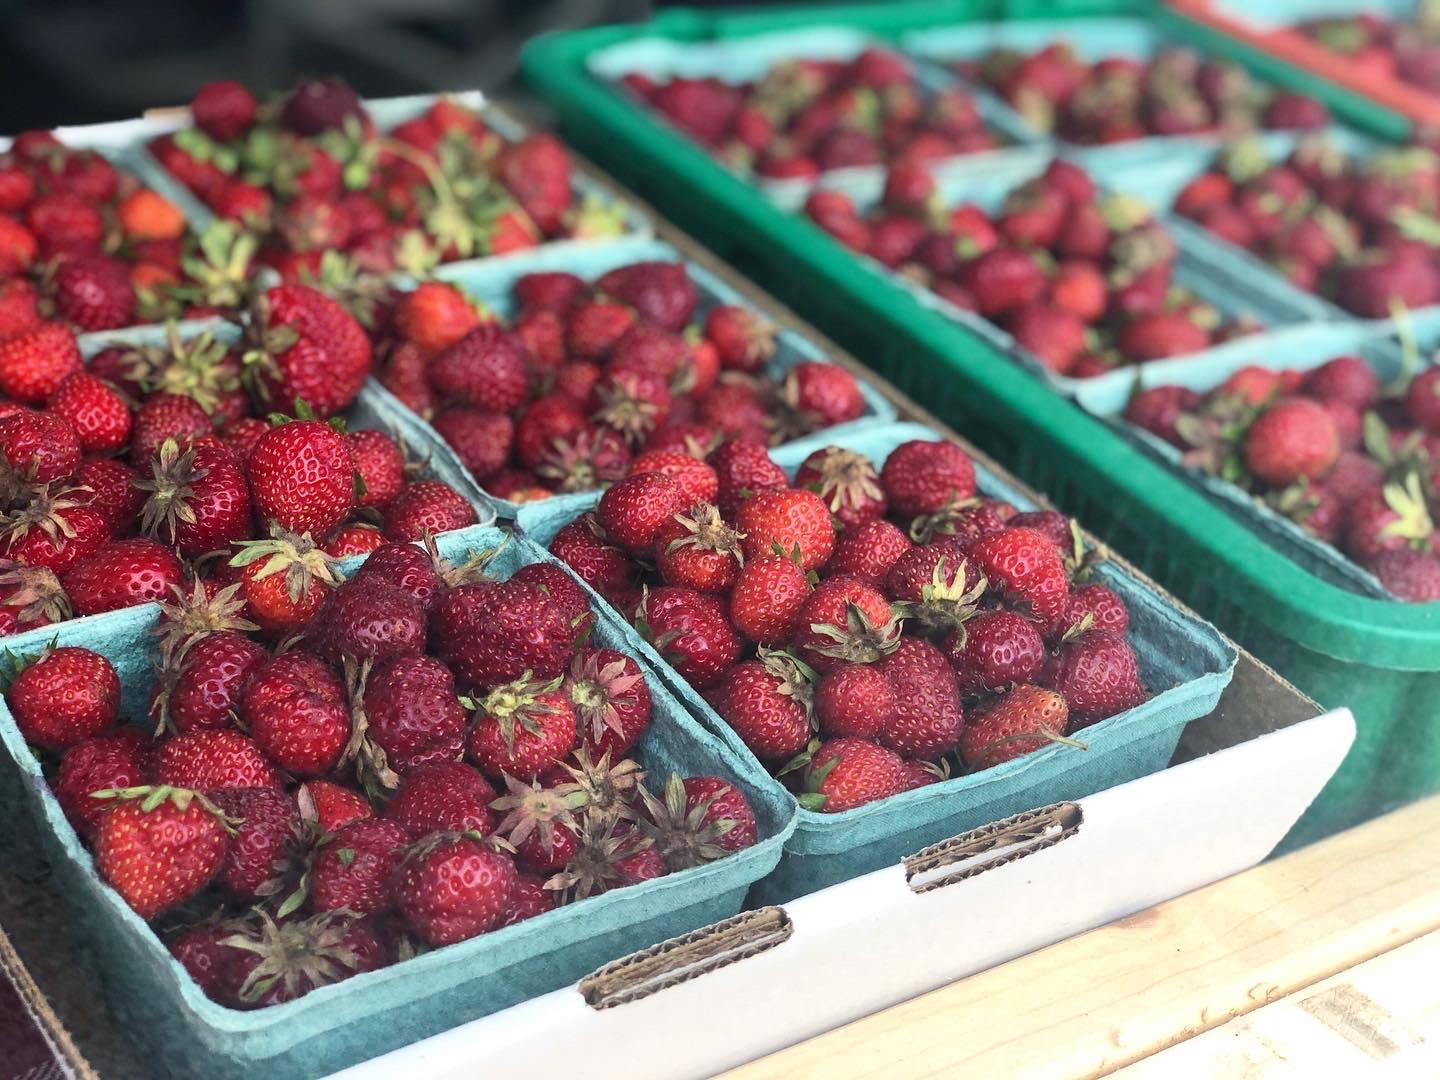 Several pints of strawberries are lined up inside a paper box at the farmers' market. Photo by Alyssa Buckley.